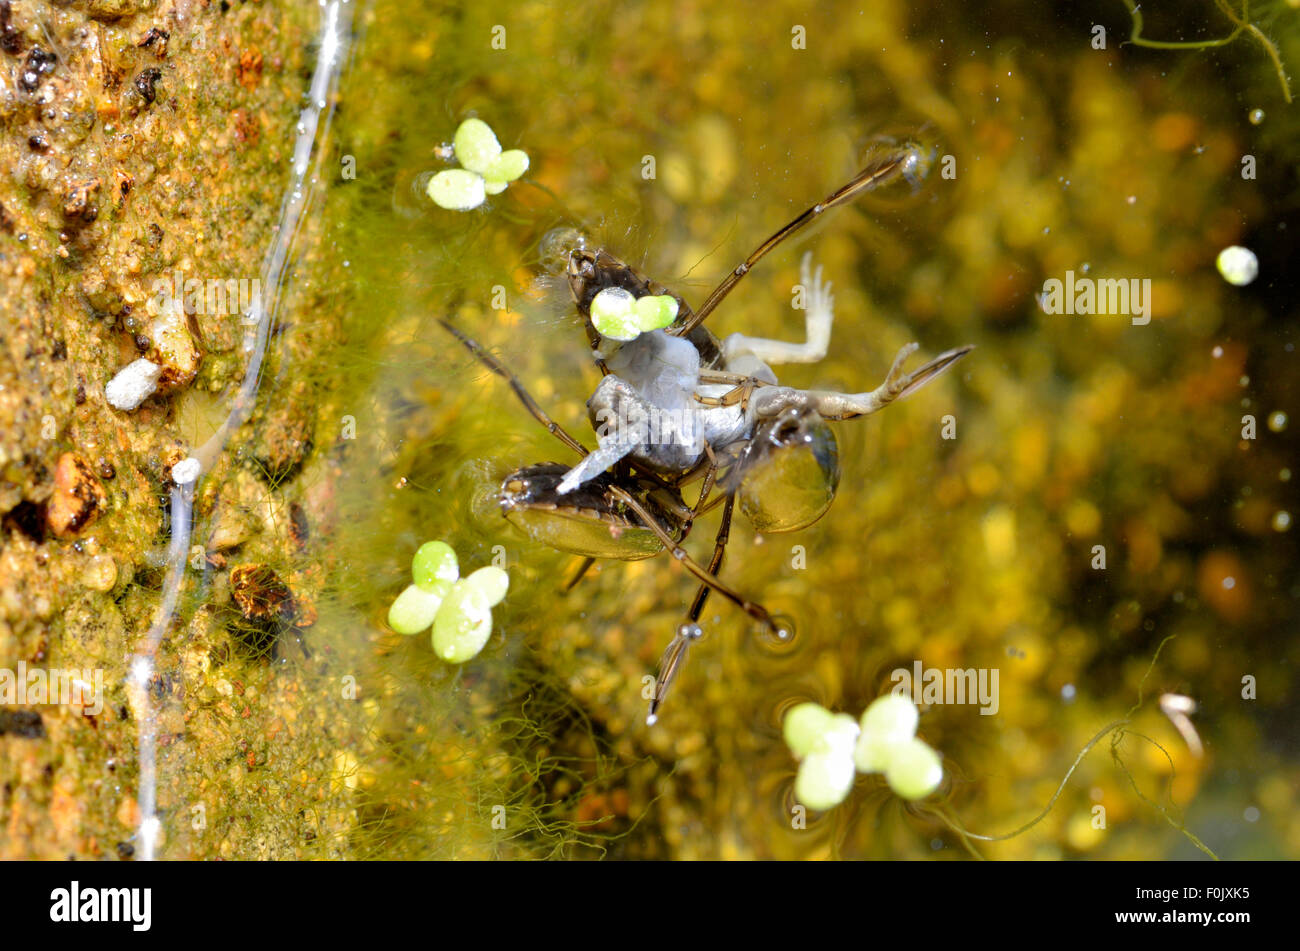 Common Backswimmer (Notonecta glauca) commonly called Water Boatman. Two adults feeding on a very young frog Stock Photo